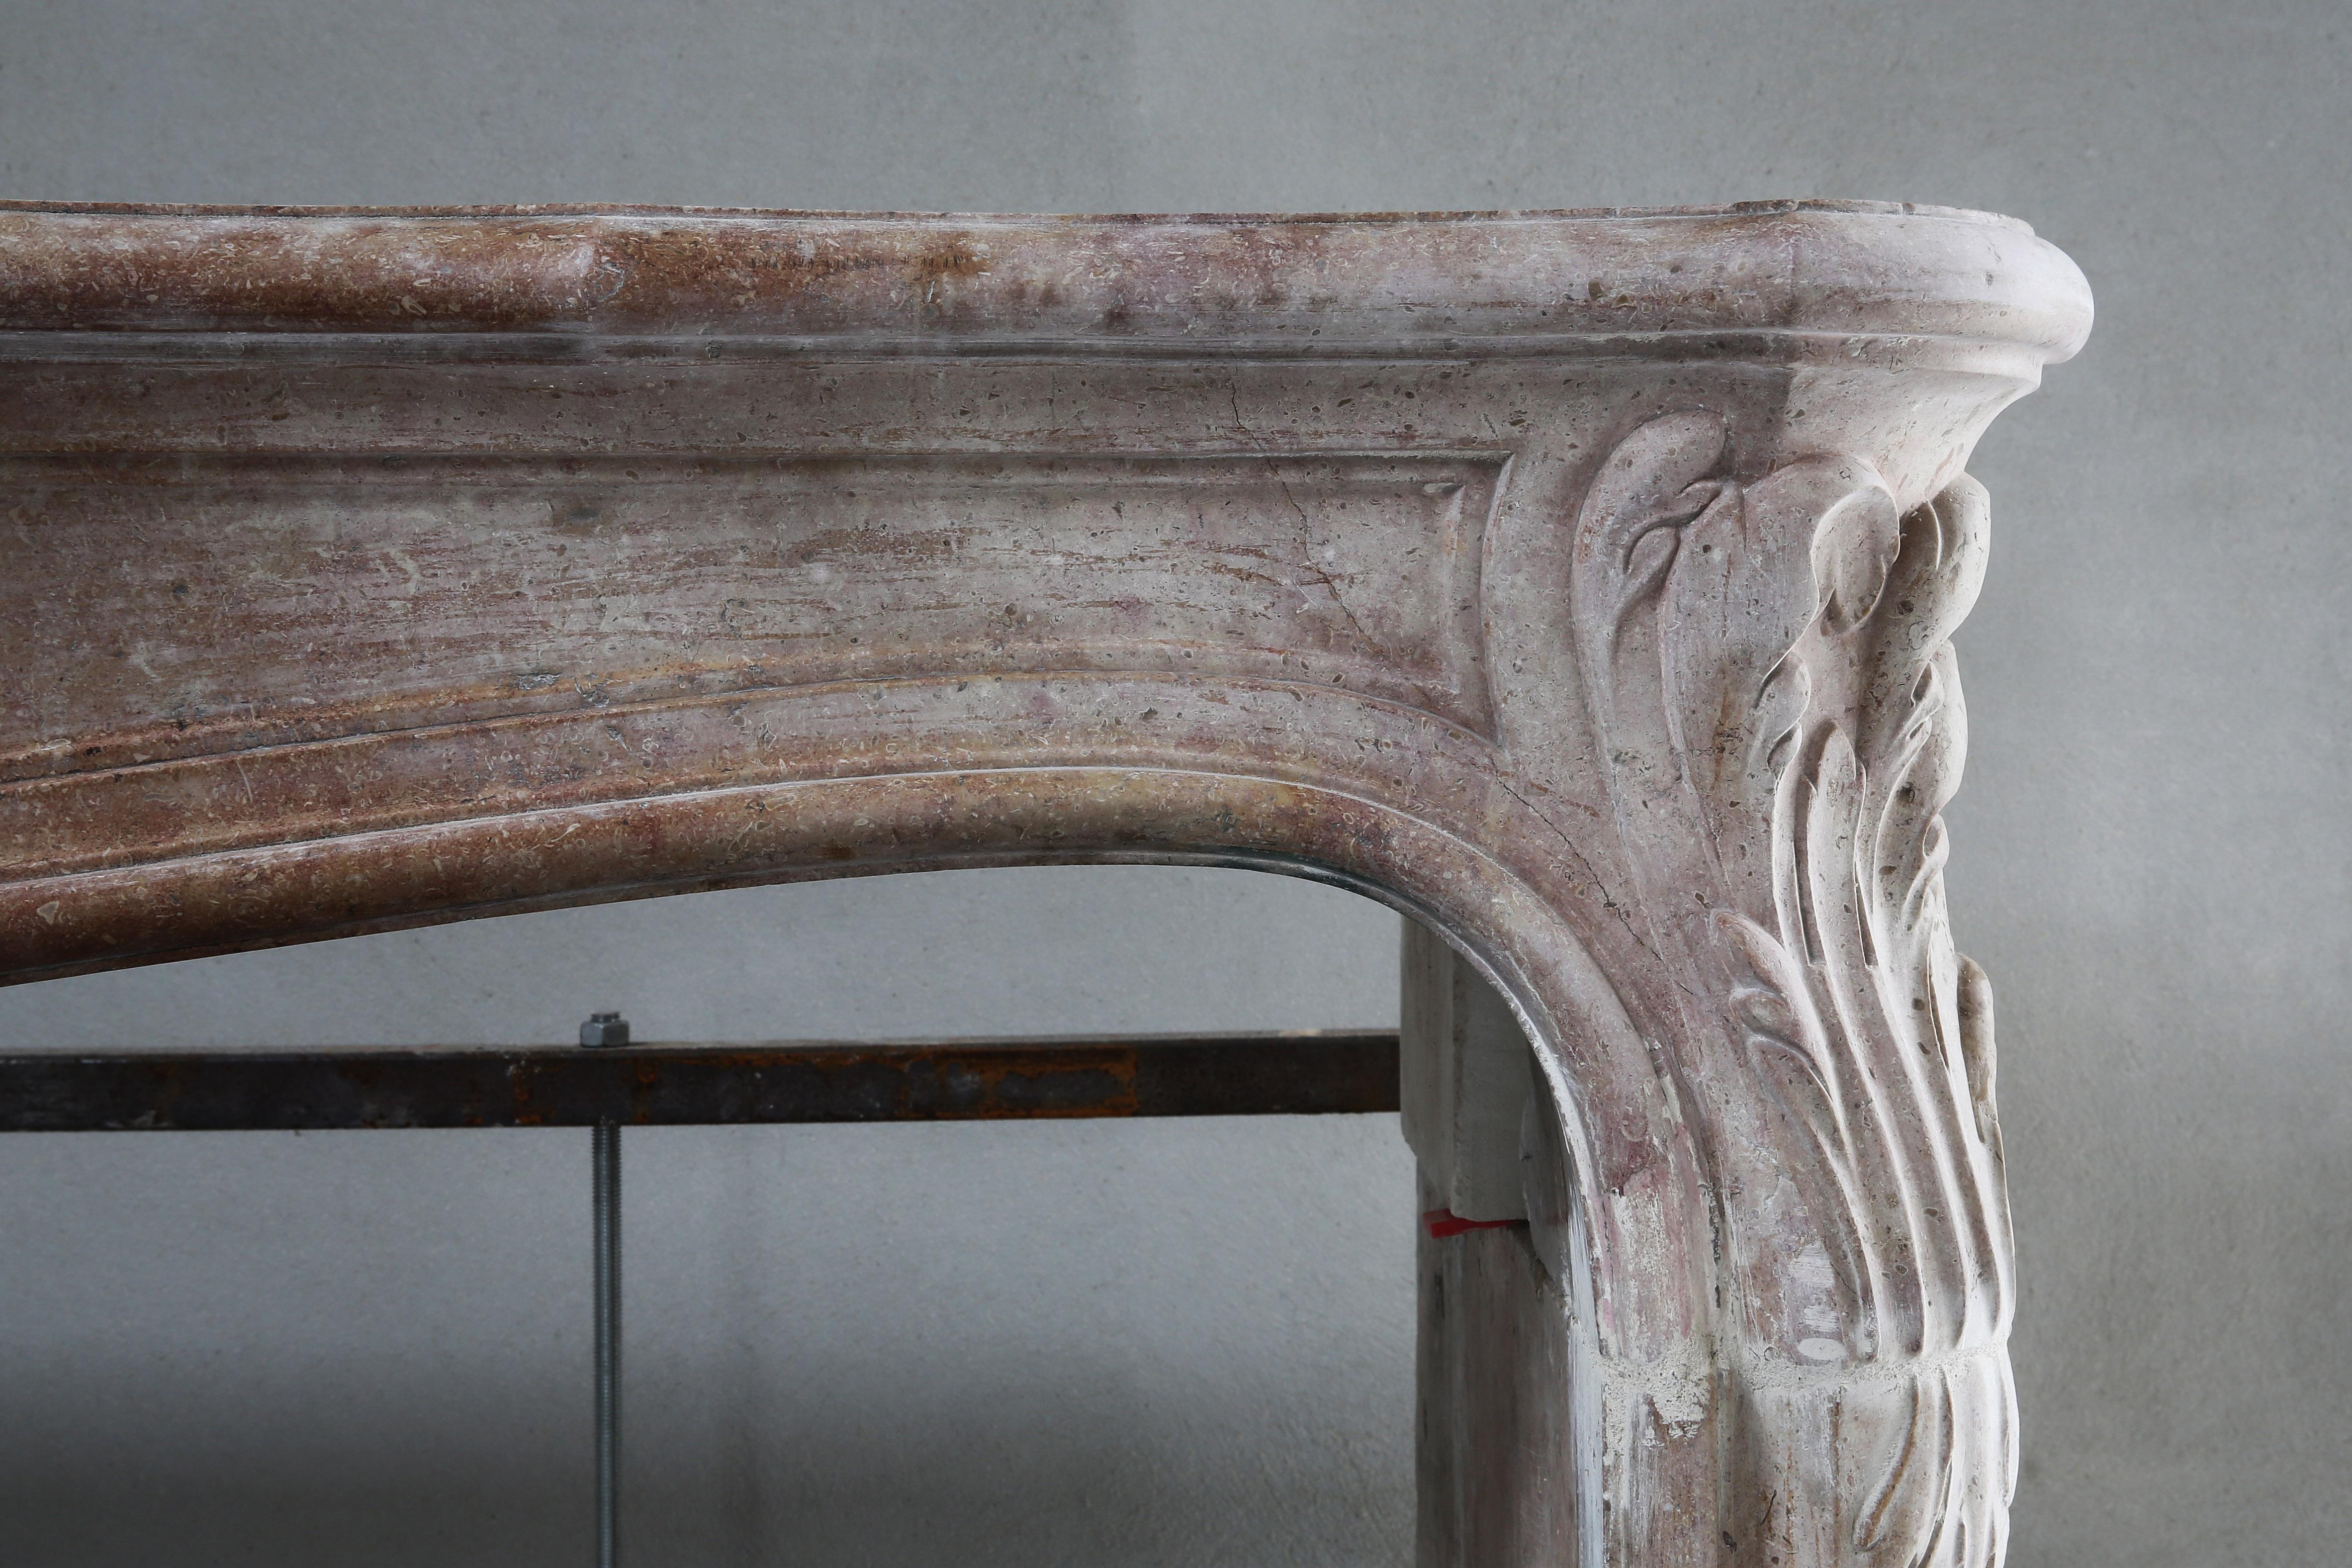 French Antique Mantel of Pierre de Bourgogne Marble Stone, Louis XV Style, 19th Century